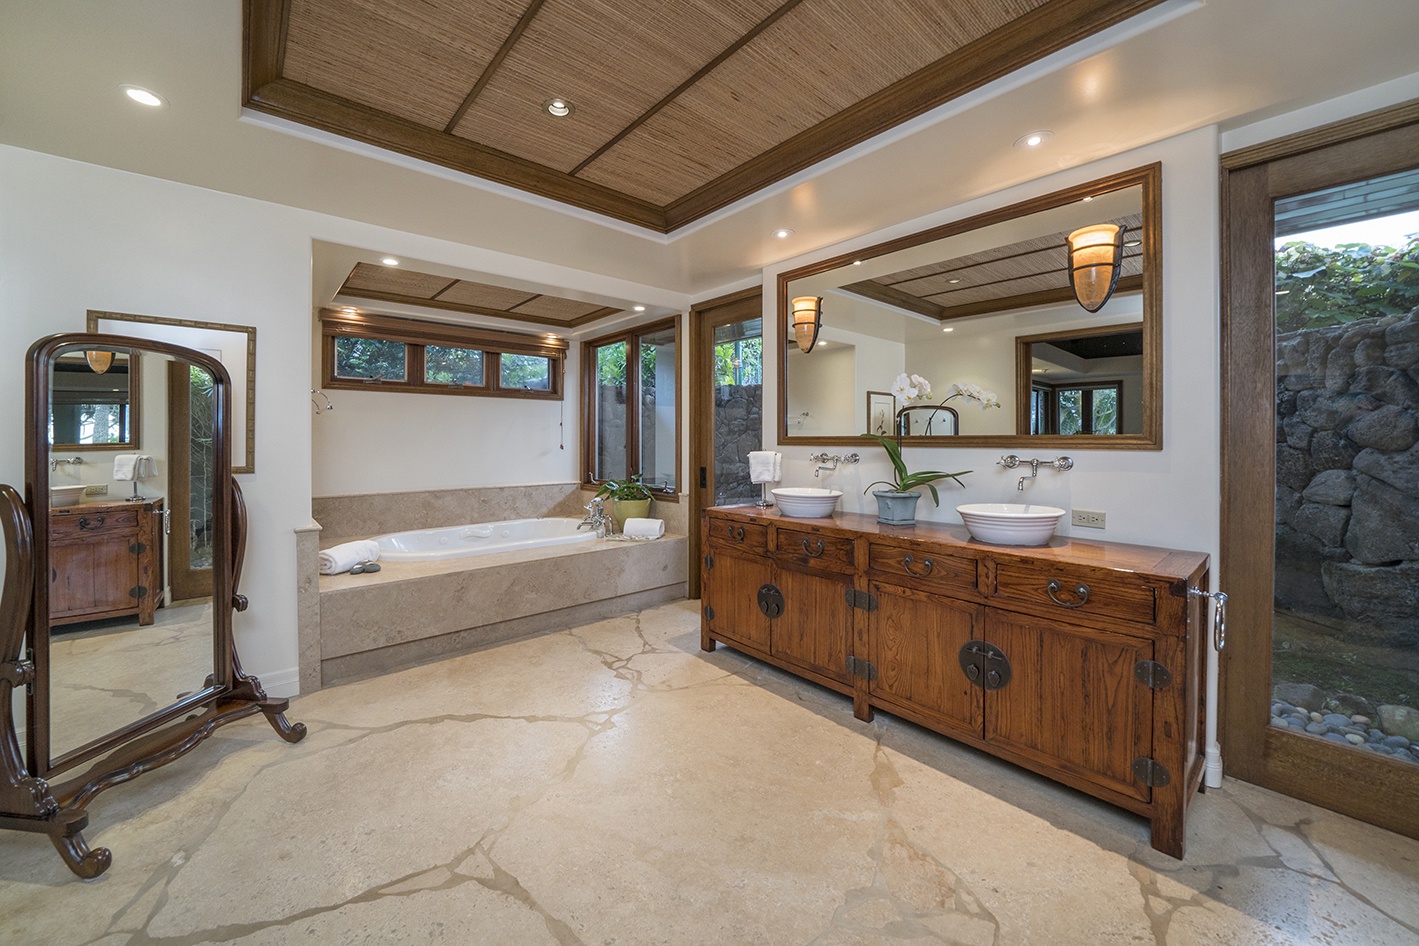 Kailua Vacation Rentals, Kailua's Kai Moena Estate - Guest house: Primary Bathroom with jetted tub and outdoor shower.